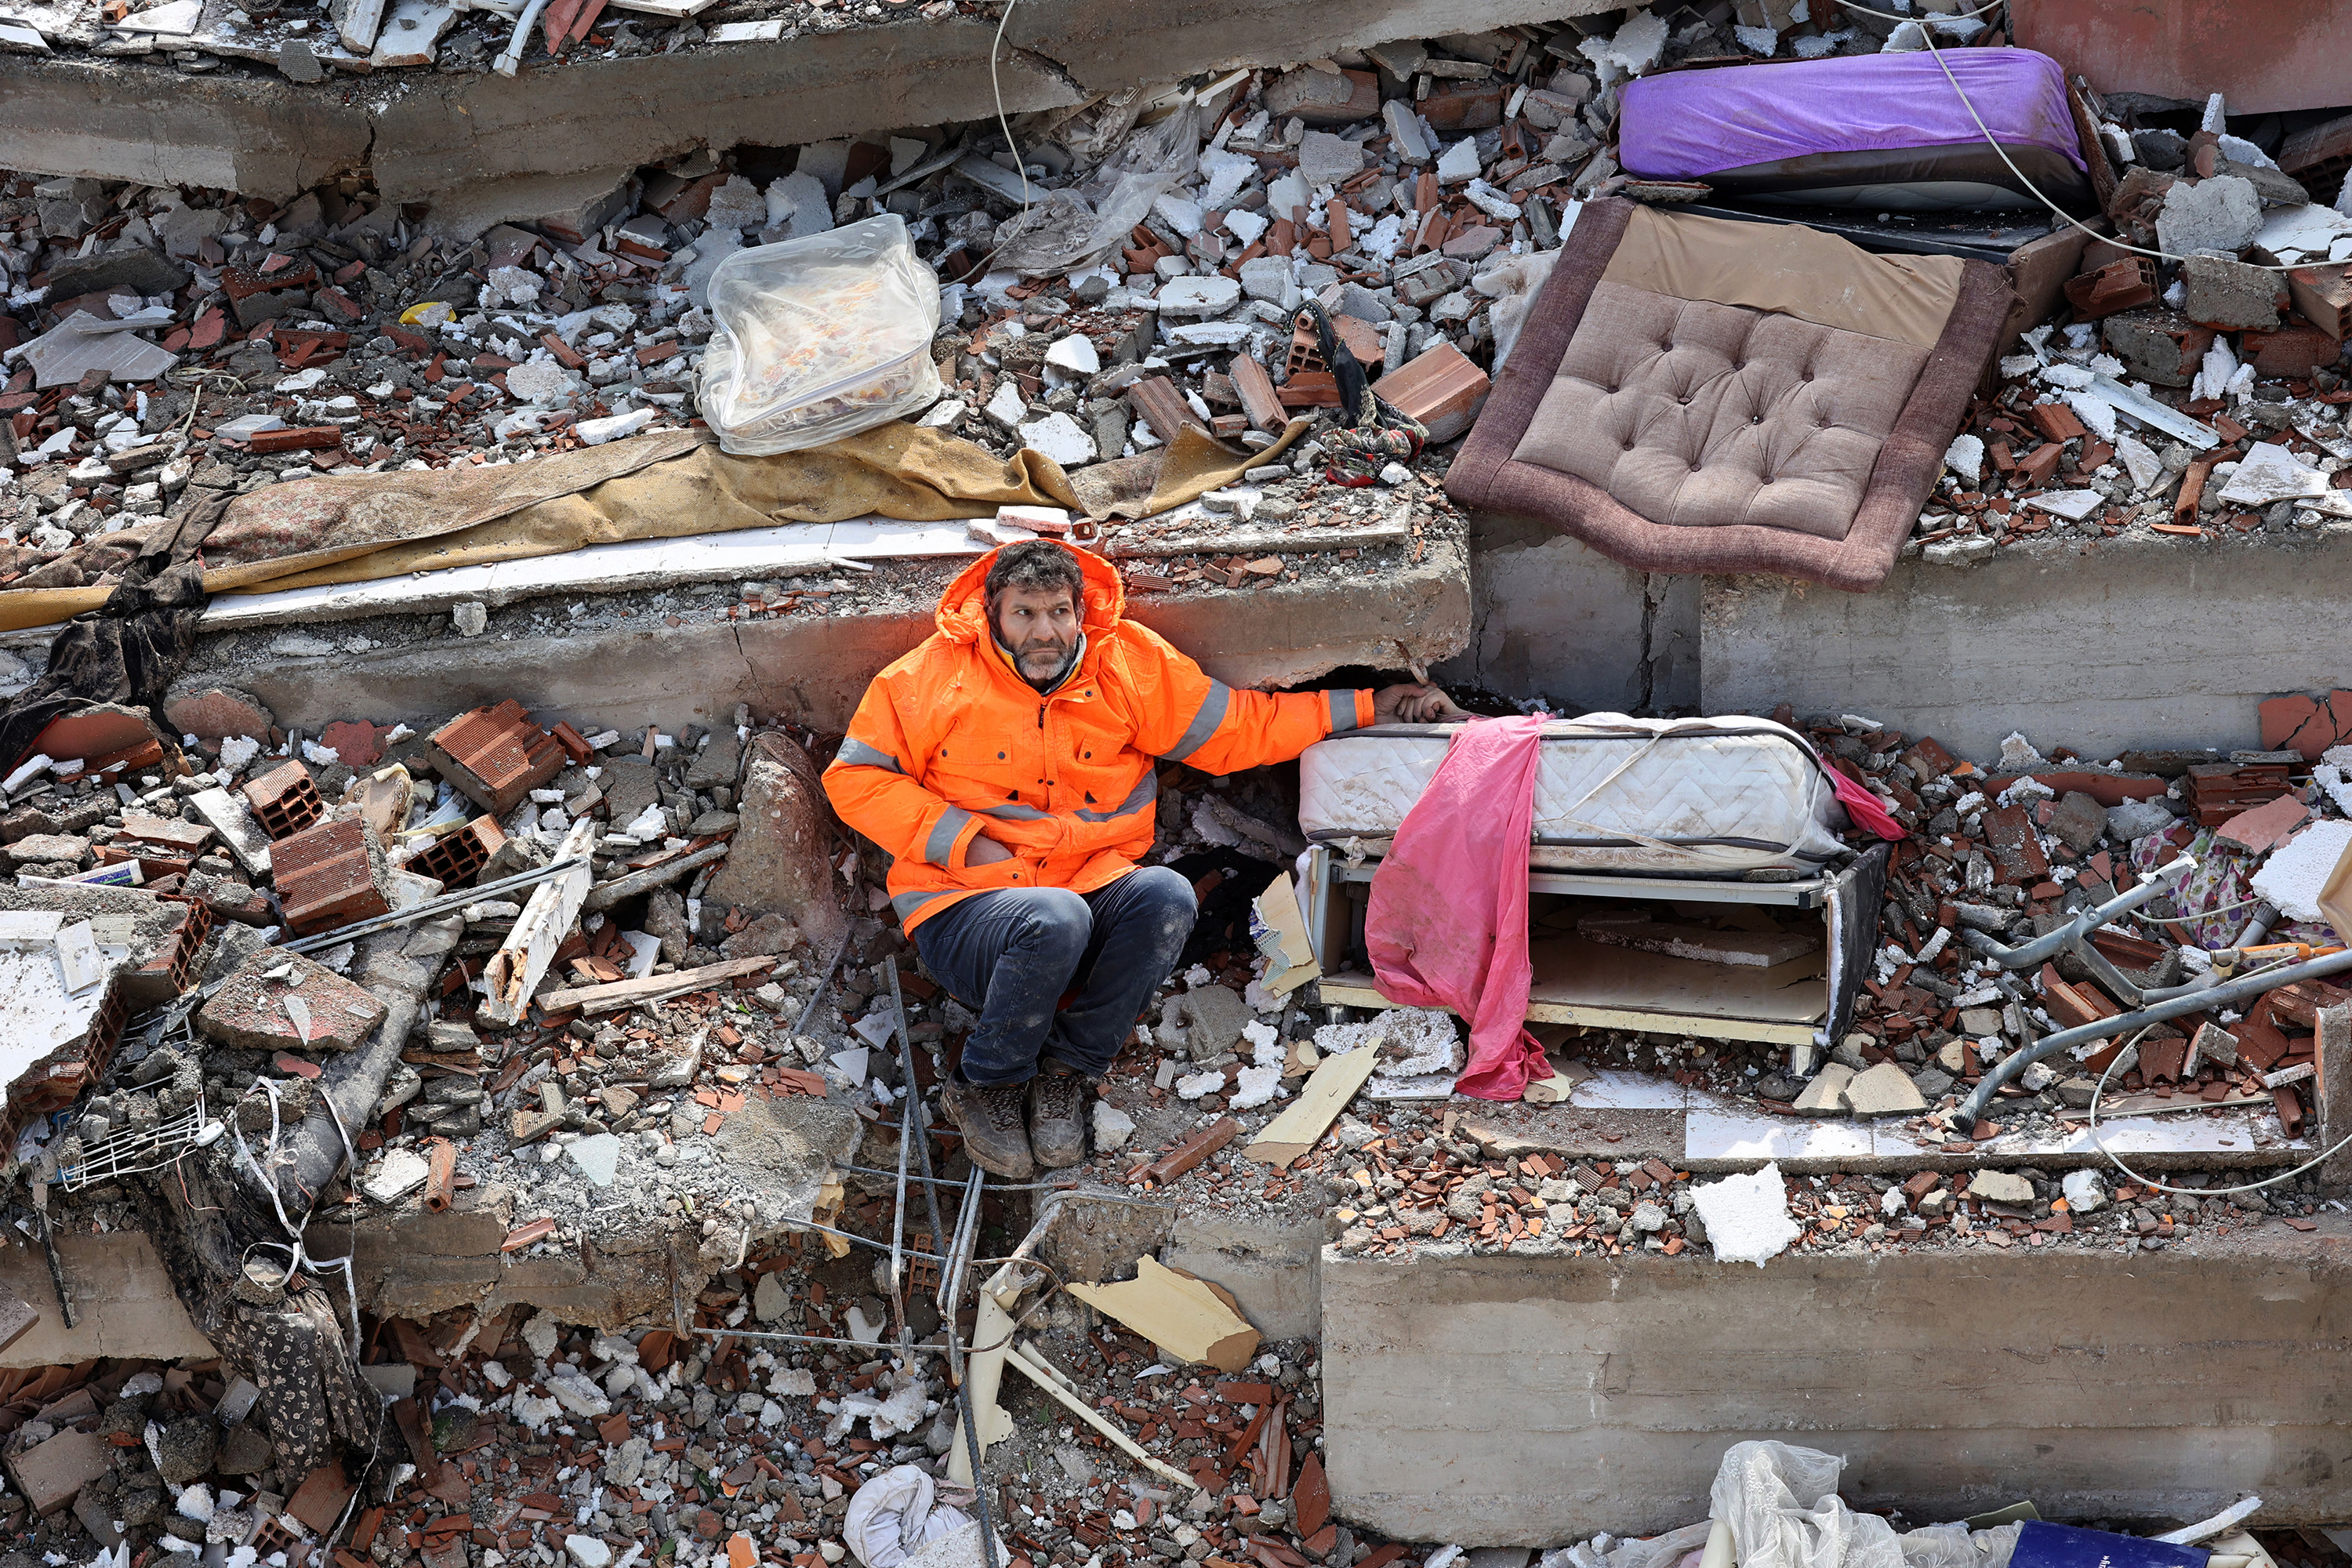 A man in an orange high-visibility jacket sits among the rubble of a building destroyed by a earthquake